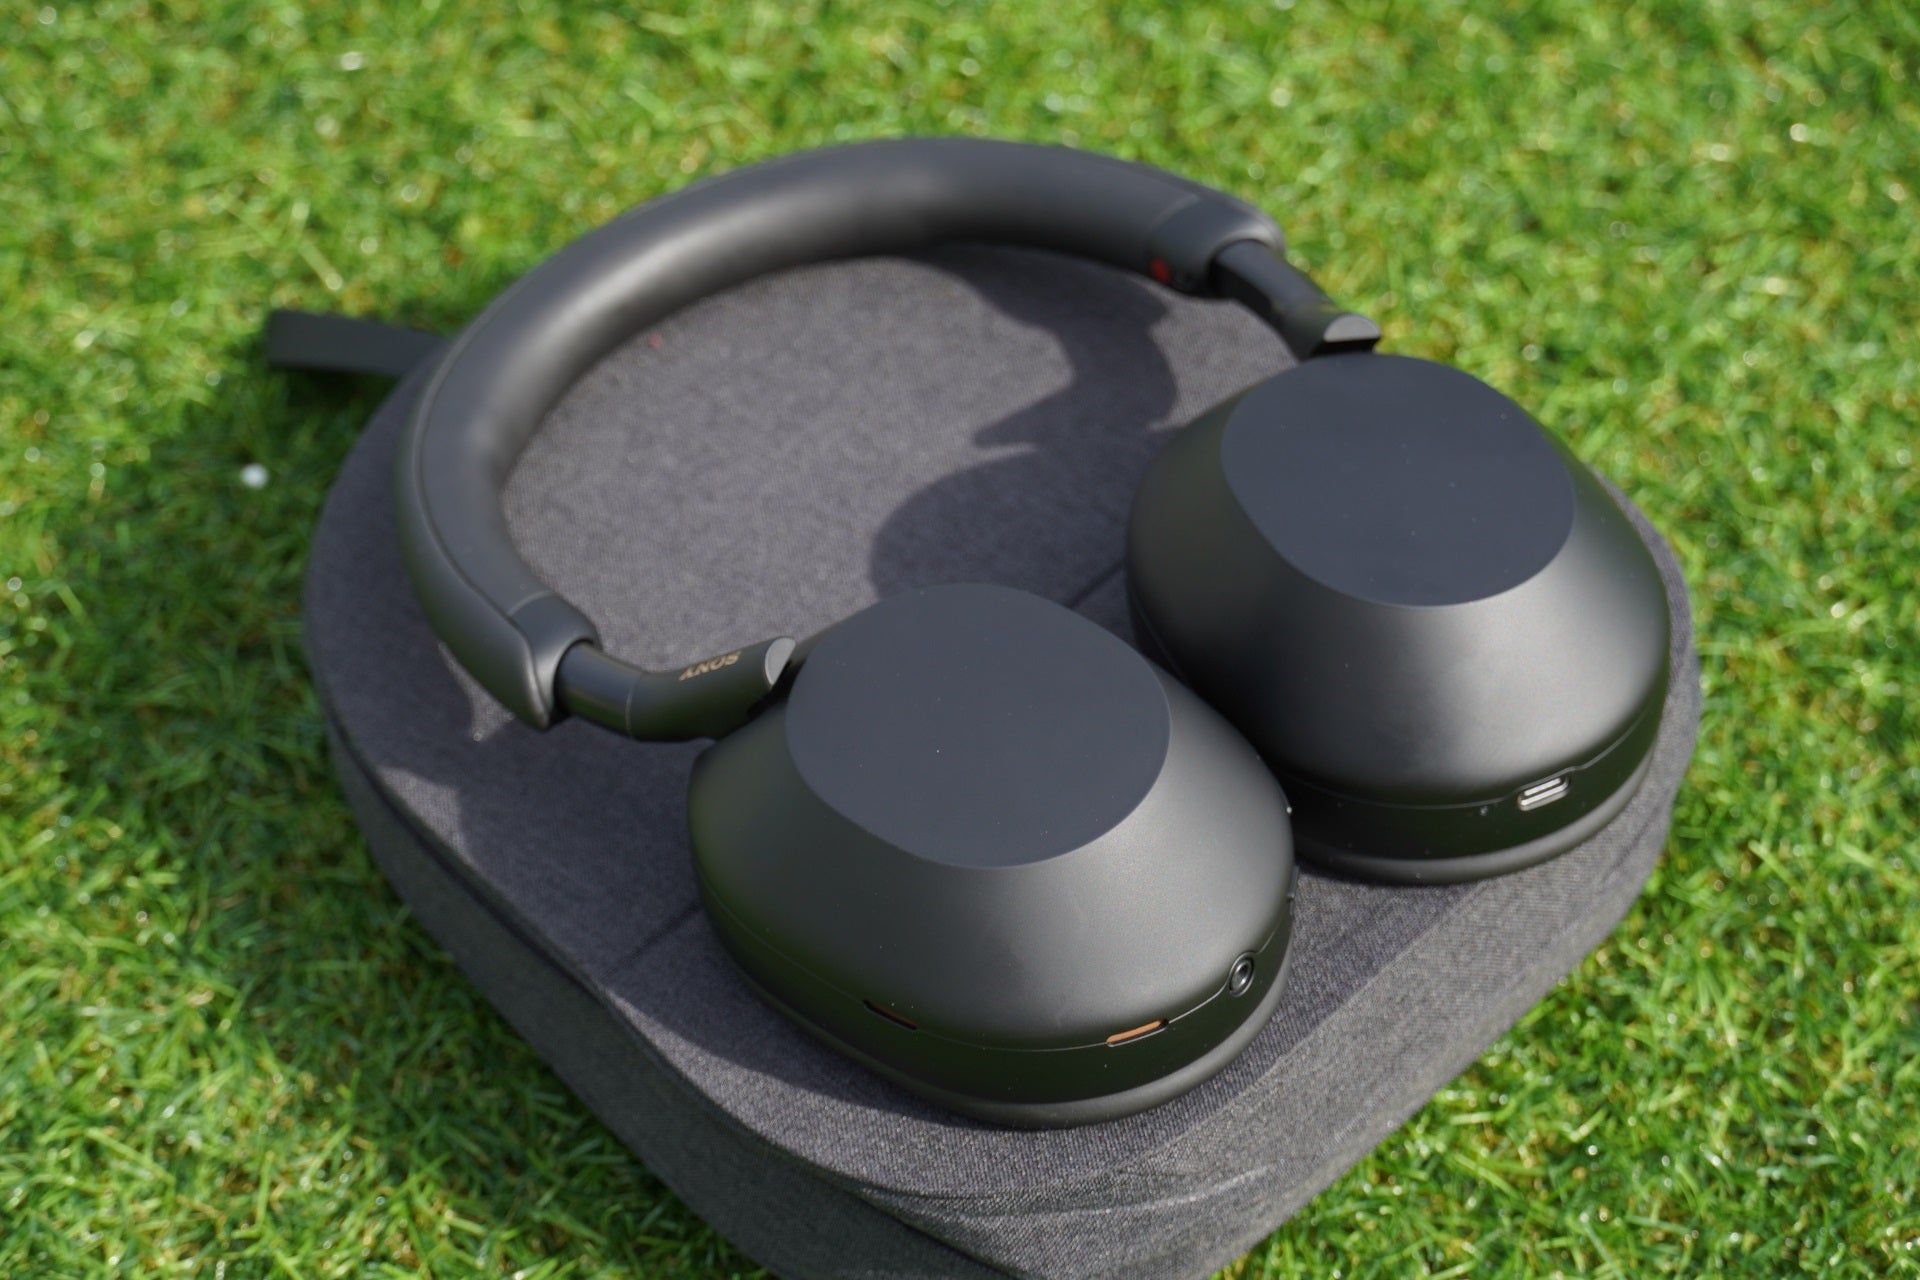 Sony’s 5-star ANC headphones are down to a tempting price